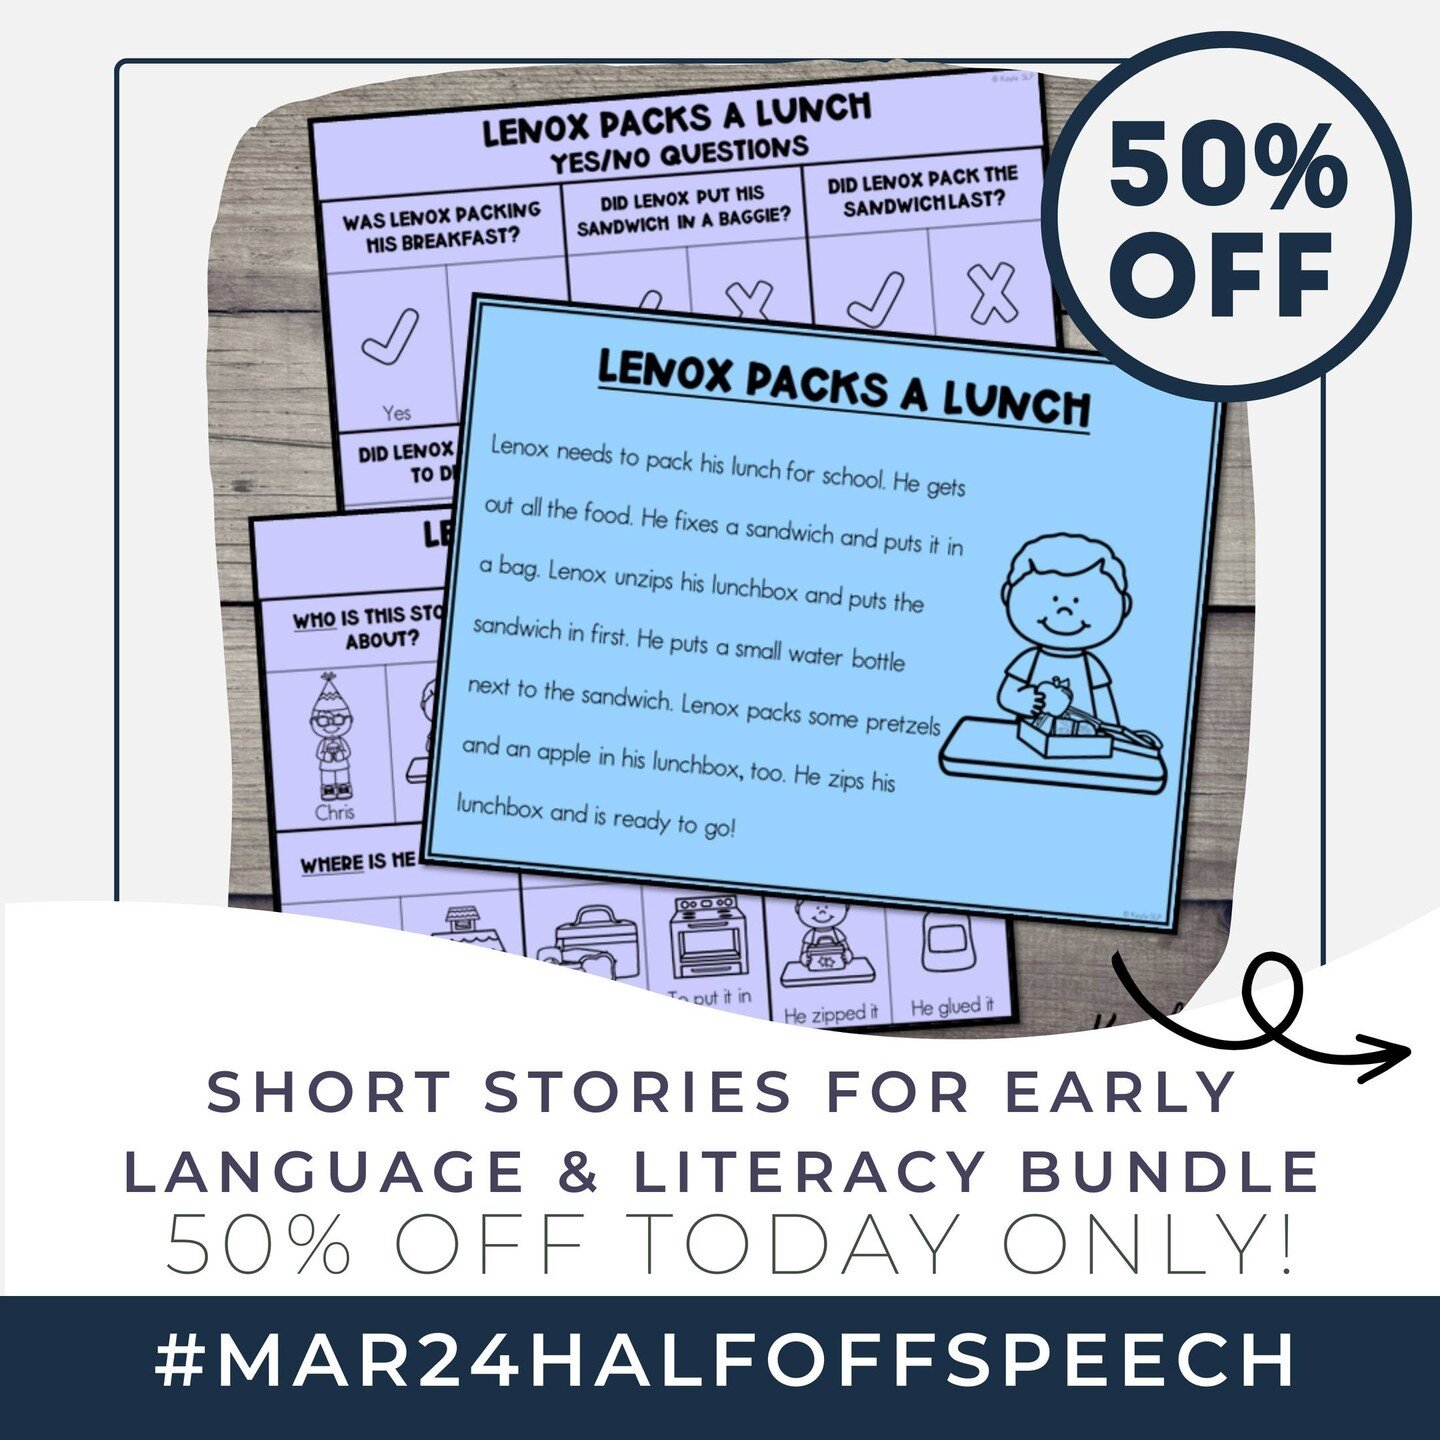 Elevate your early language and literacy sessions with these captivating short stories Designed to engage young learners and promote language development, this bundle is a must-have for SLPs! ⁠
⁠
Get your special 50% discount today only. Don't miss o